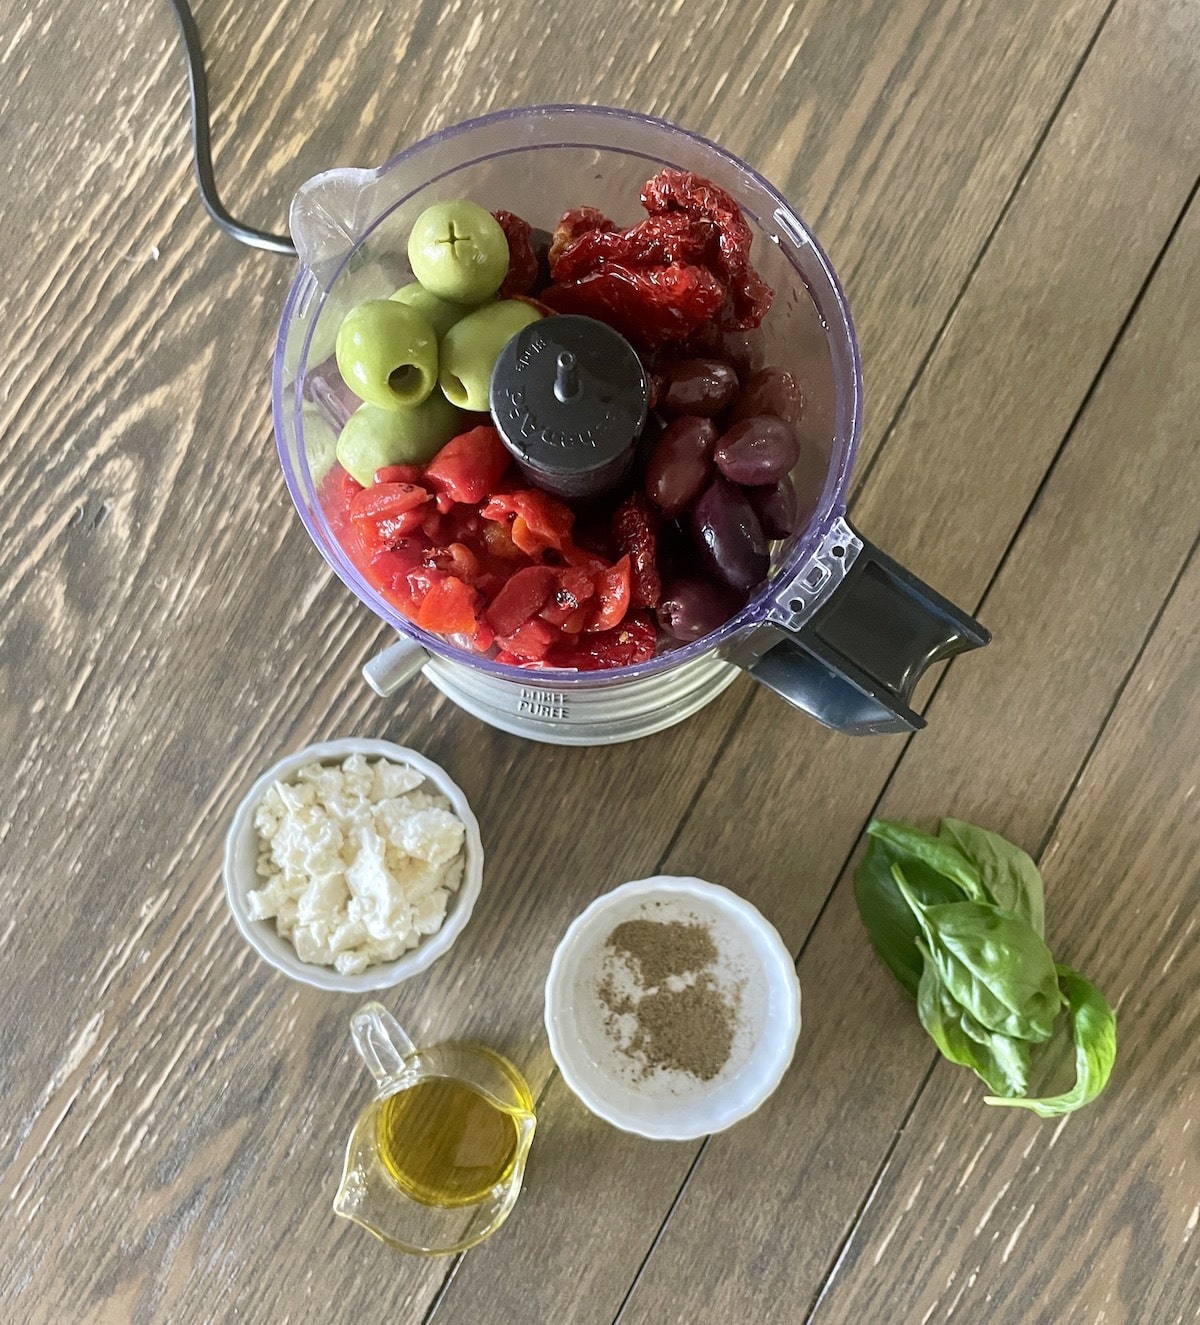 Ingredients for tapenade in a food processor with feta, pepper, olive oil, and basil on the side.